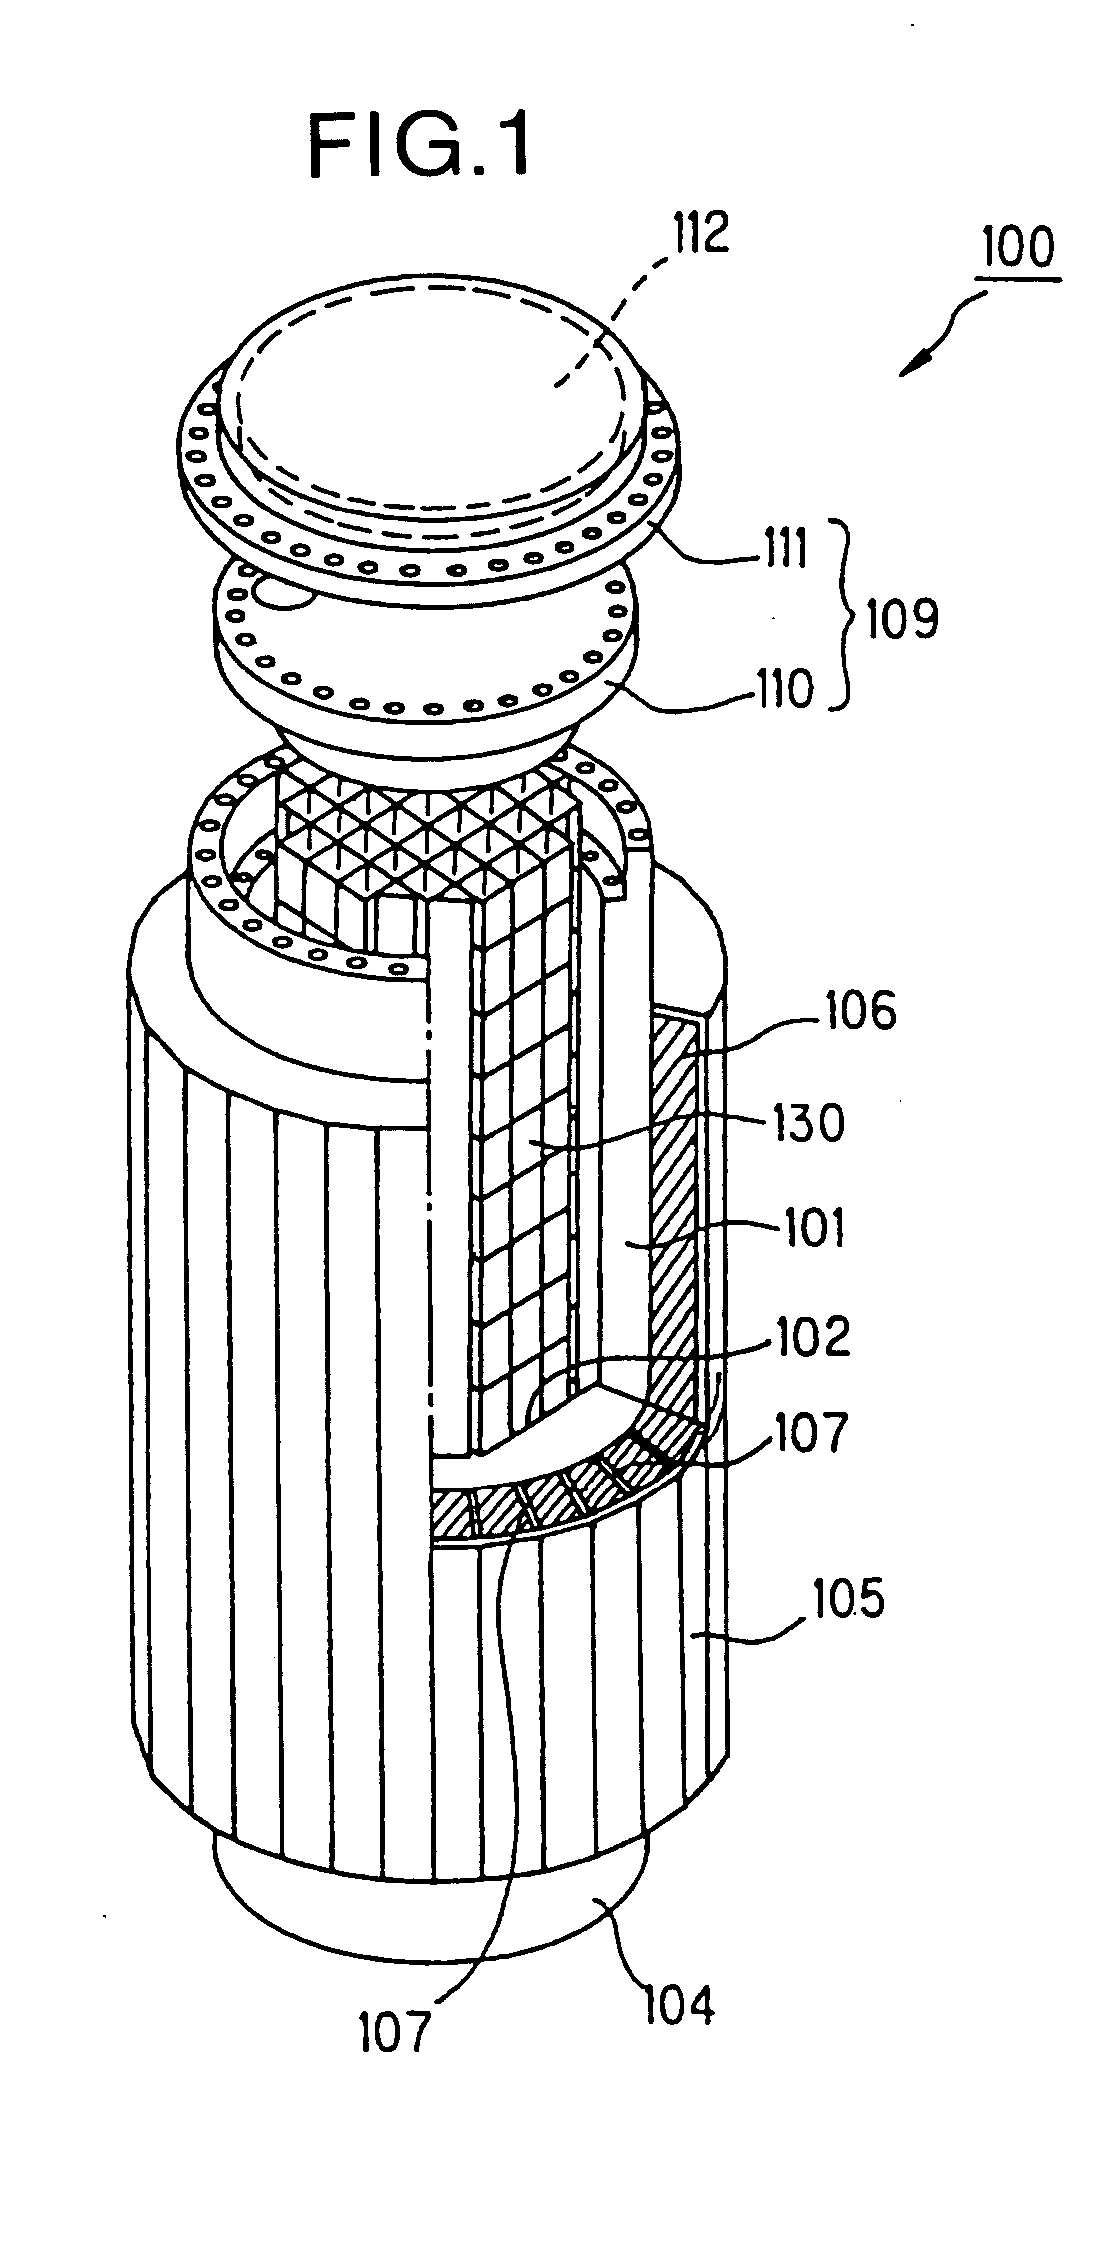 Cask and method of manufacturing the cask